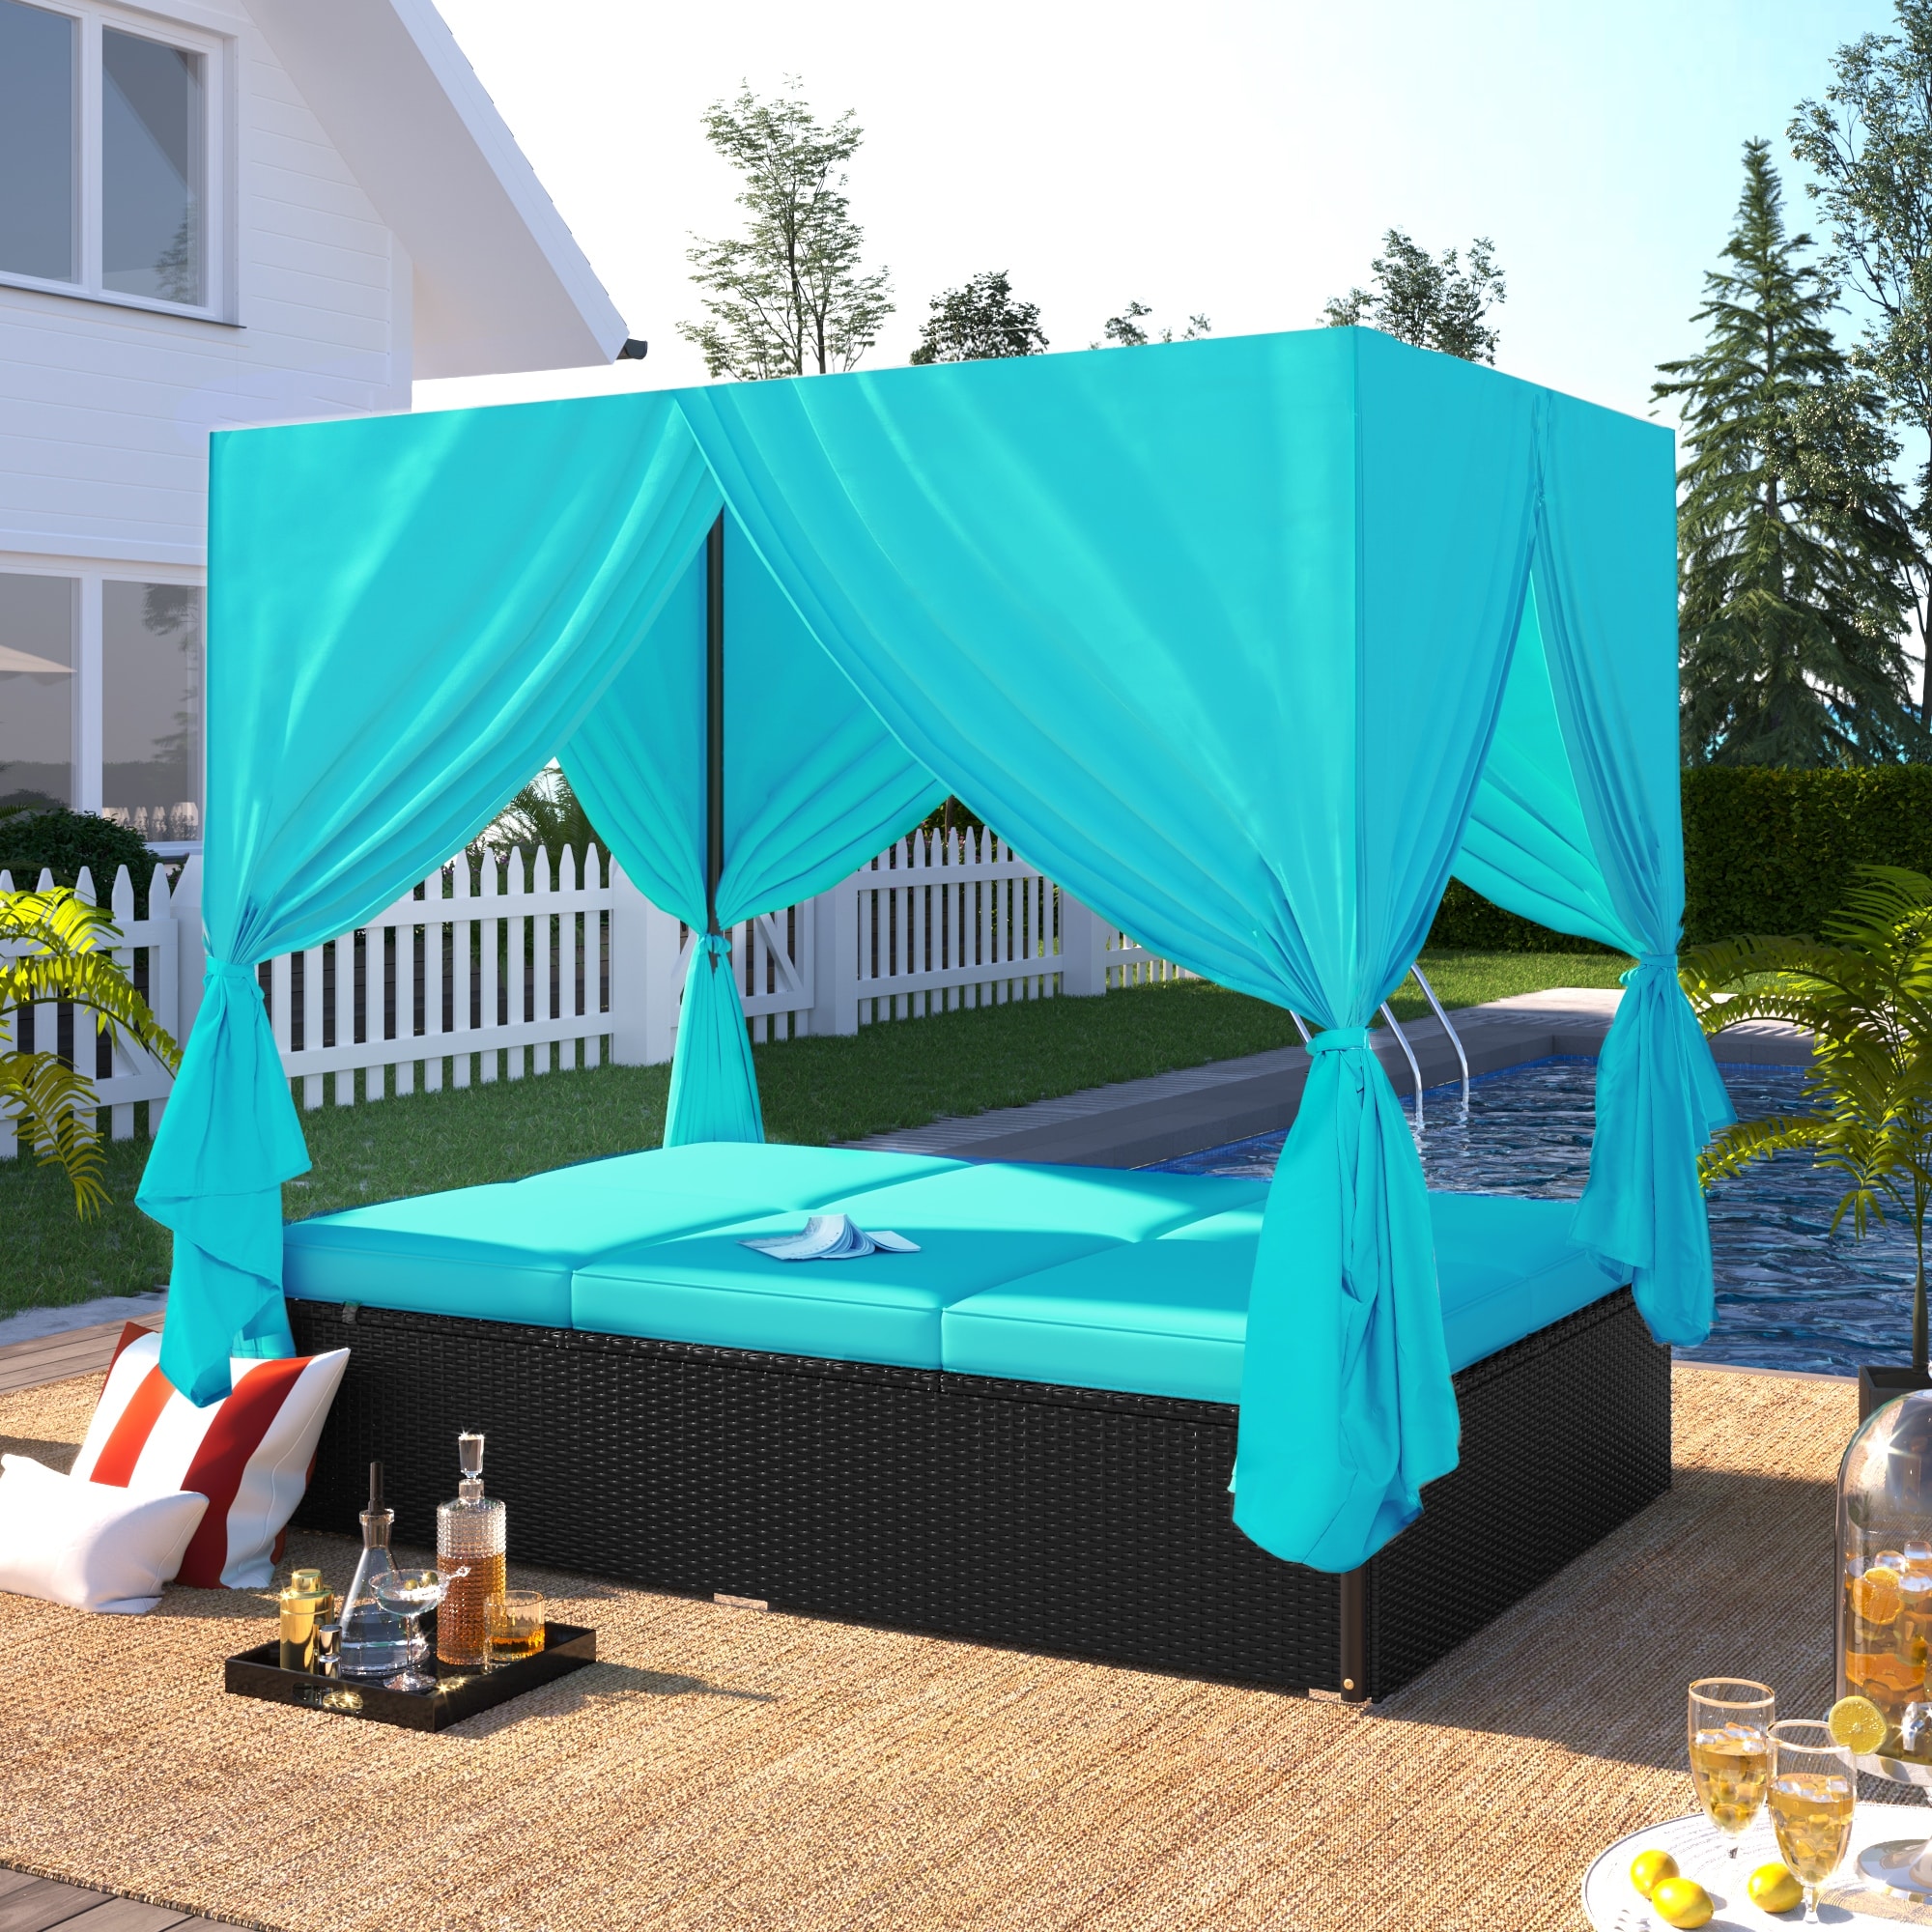  outdoor Patio Wicker Sunbed Daybed With Cushions